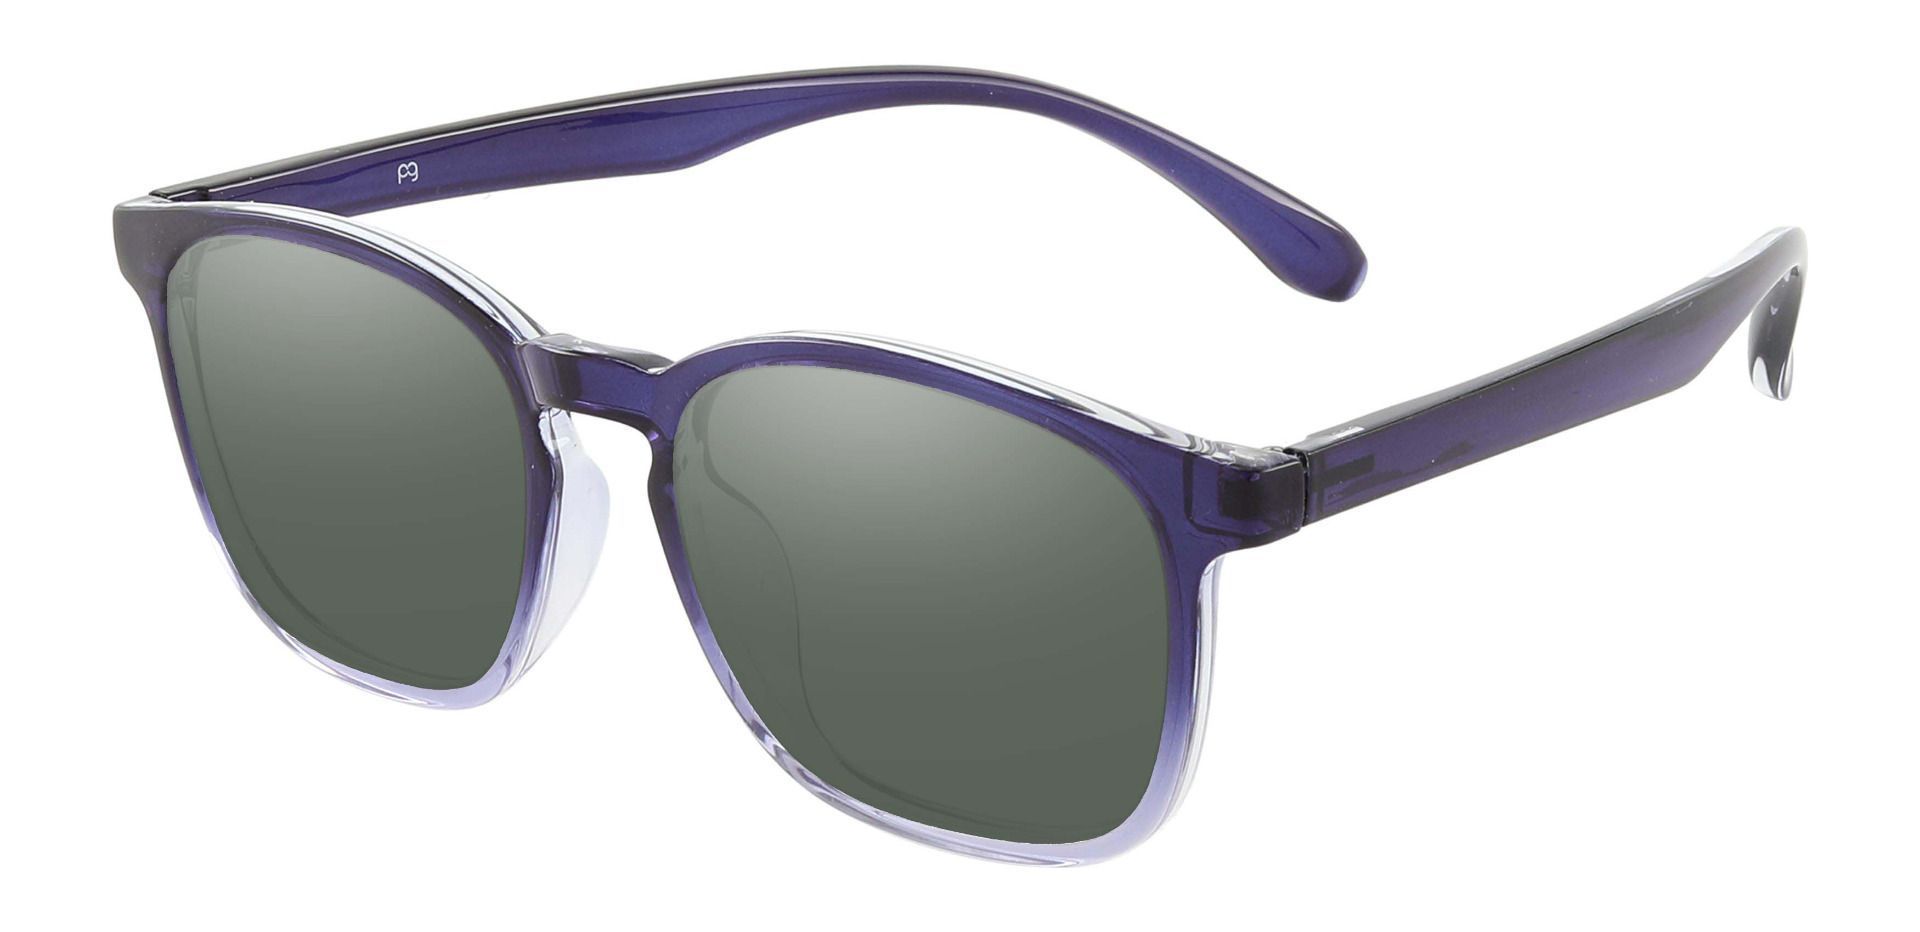 Gateway Square Reading Sunglasses - Blue Frame With Green Lenses